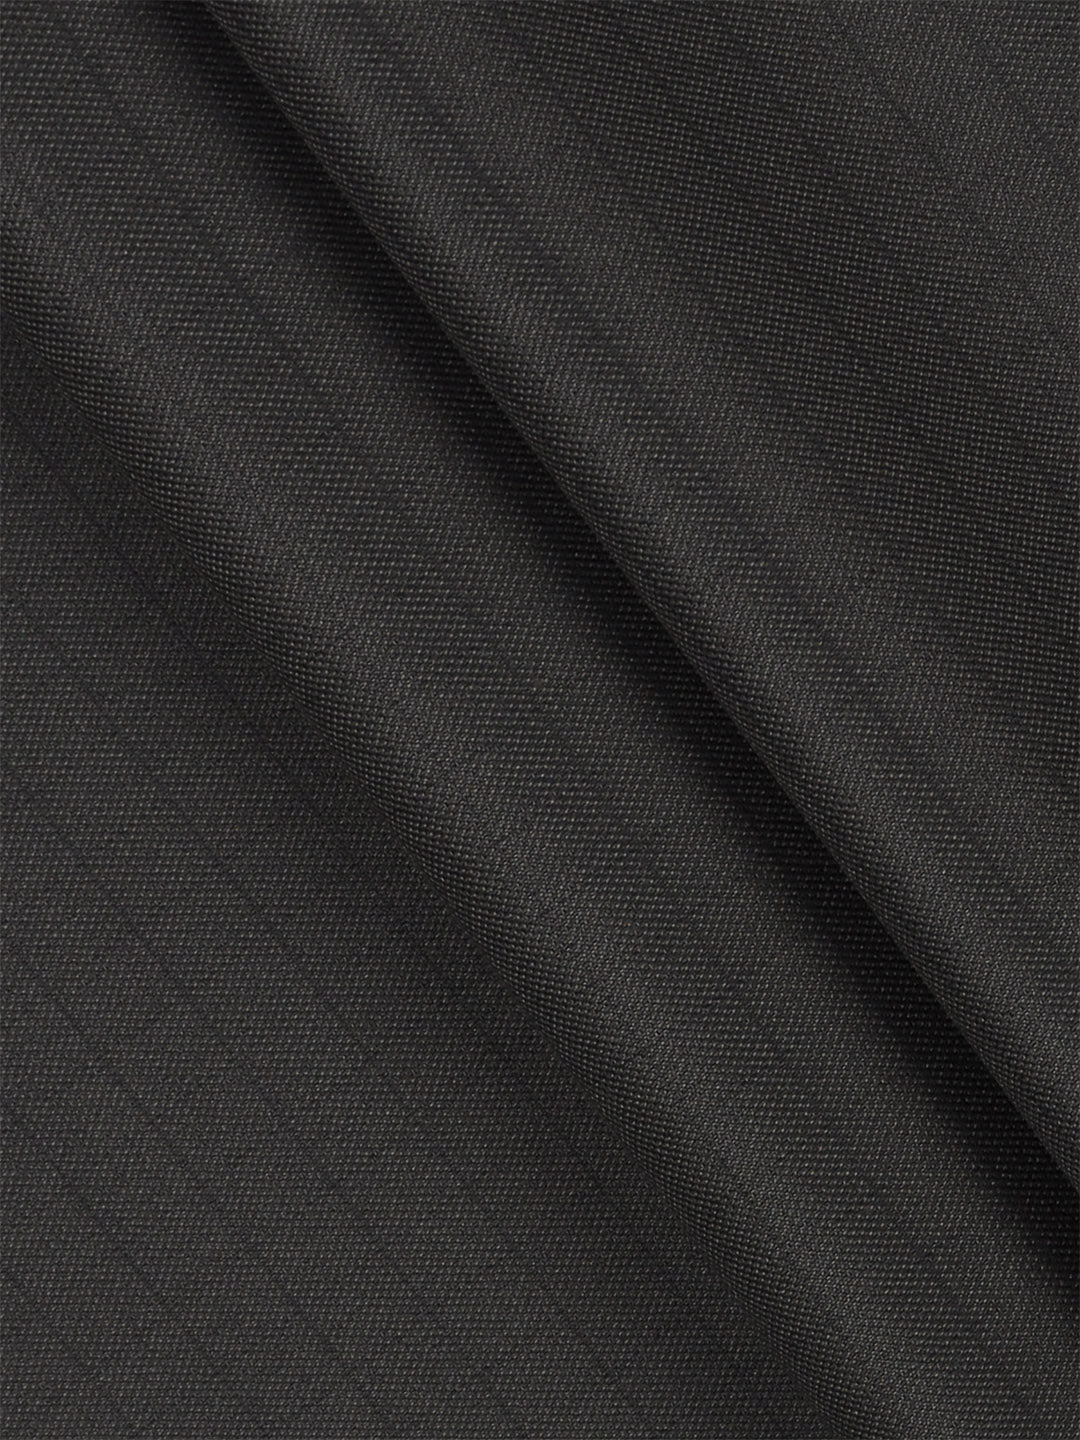 Cotton Blended Grey Colour Striped Pants Fabric Miracle